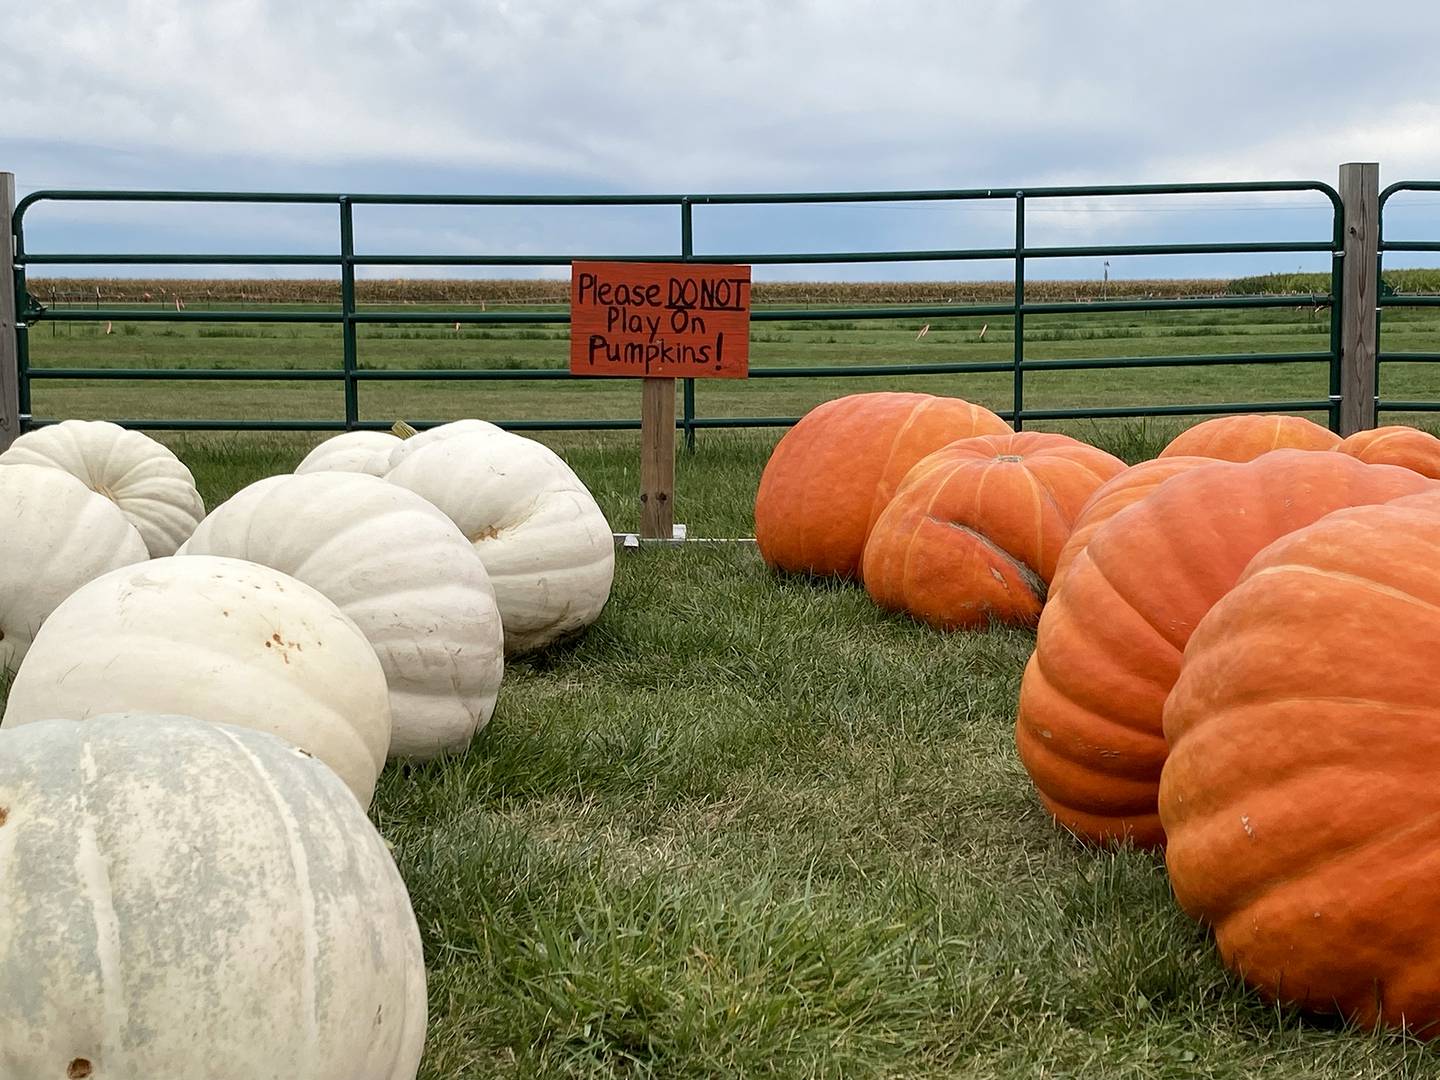 True to its name, Heap's Giant Pumpkin Farm, 4853 Route 52, in Minooka, does sell giant pumpkins — all grown on site.